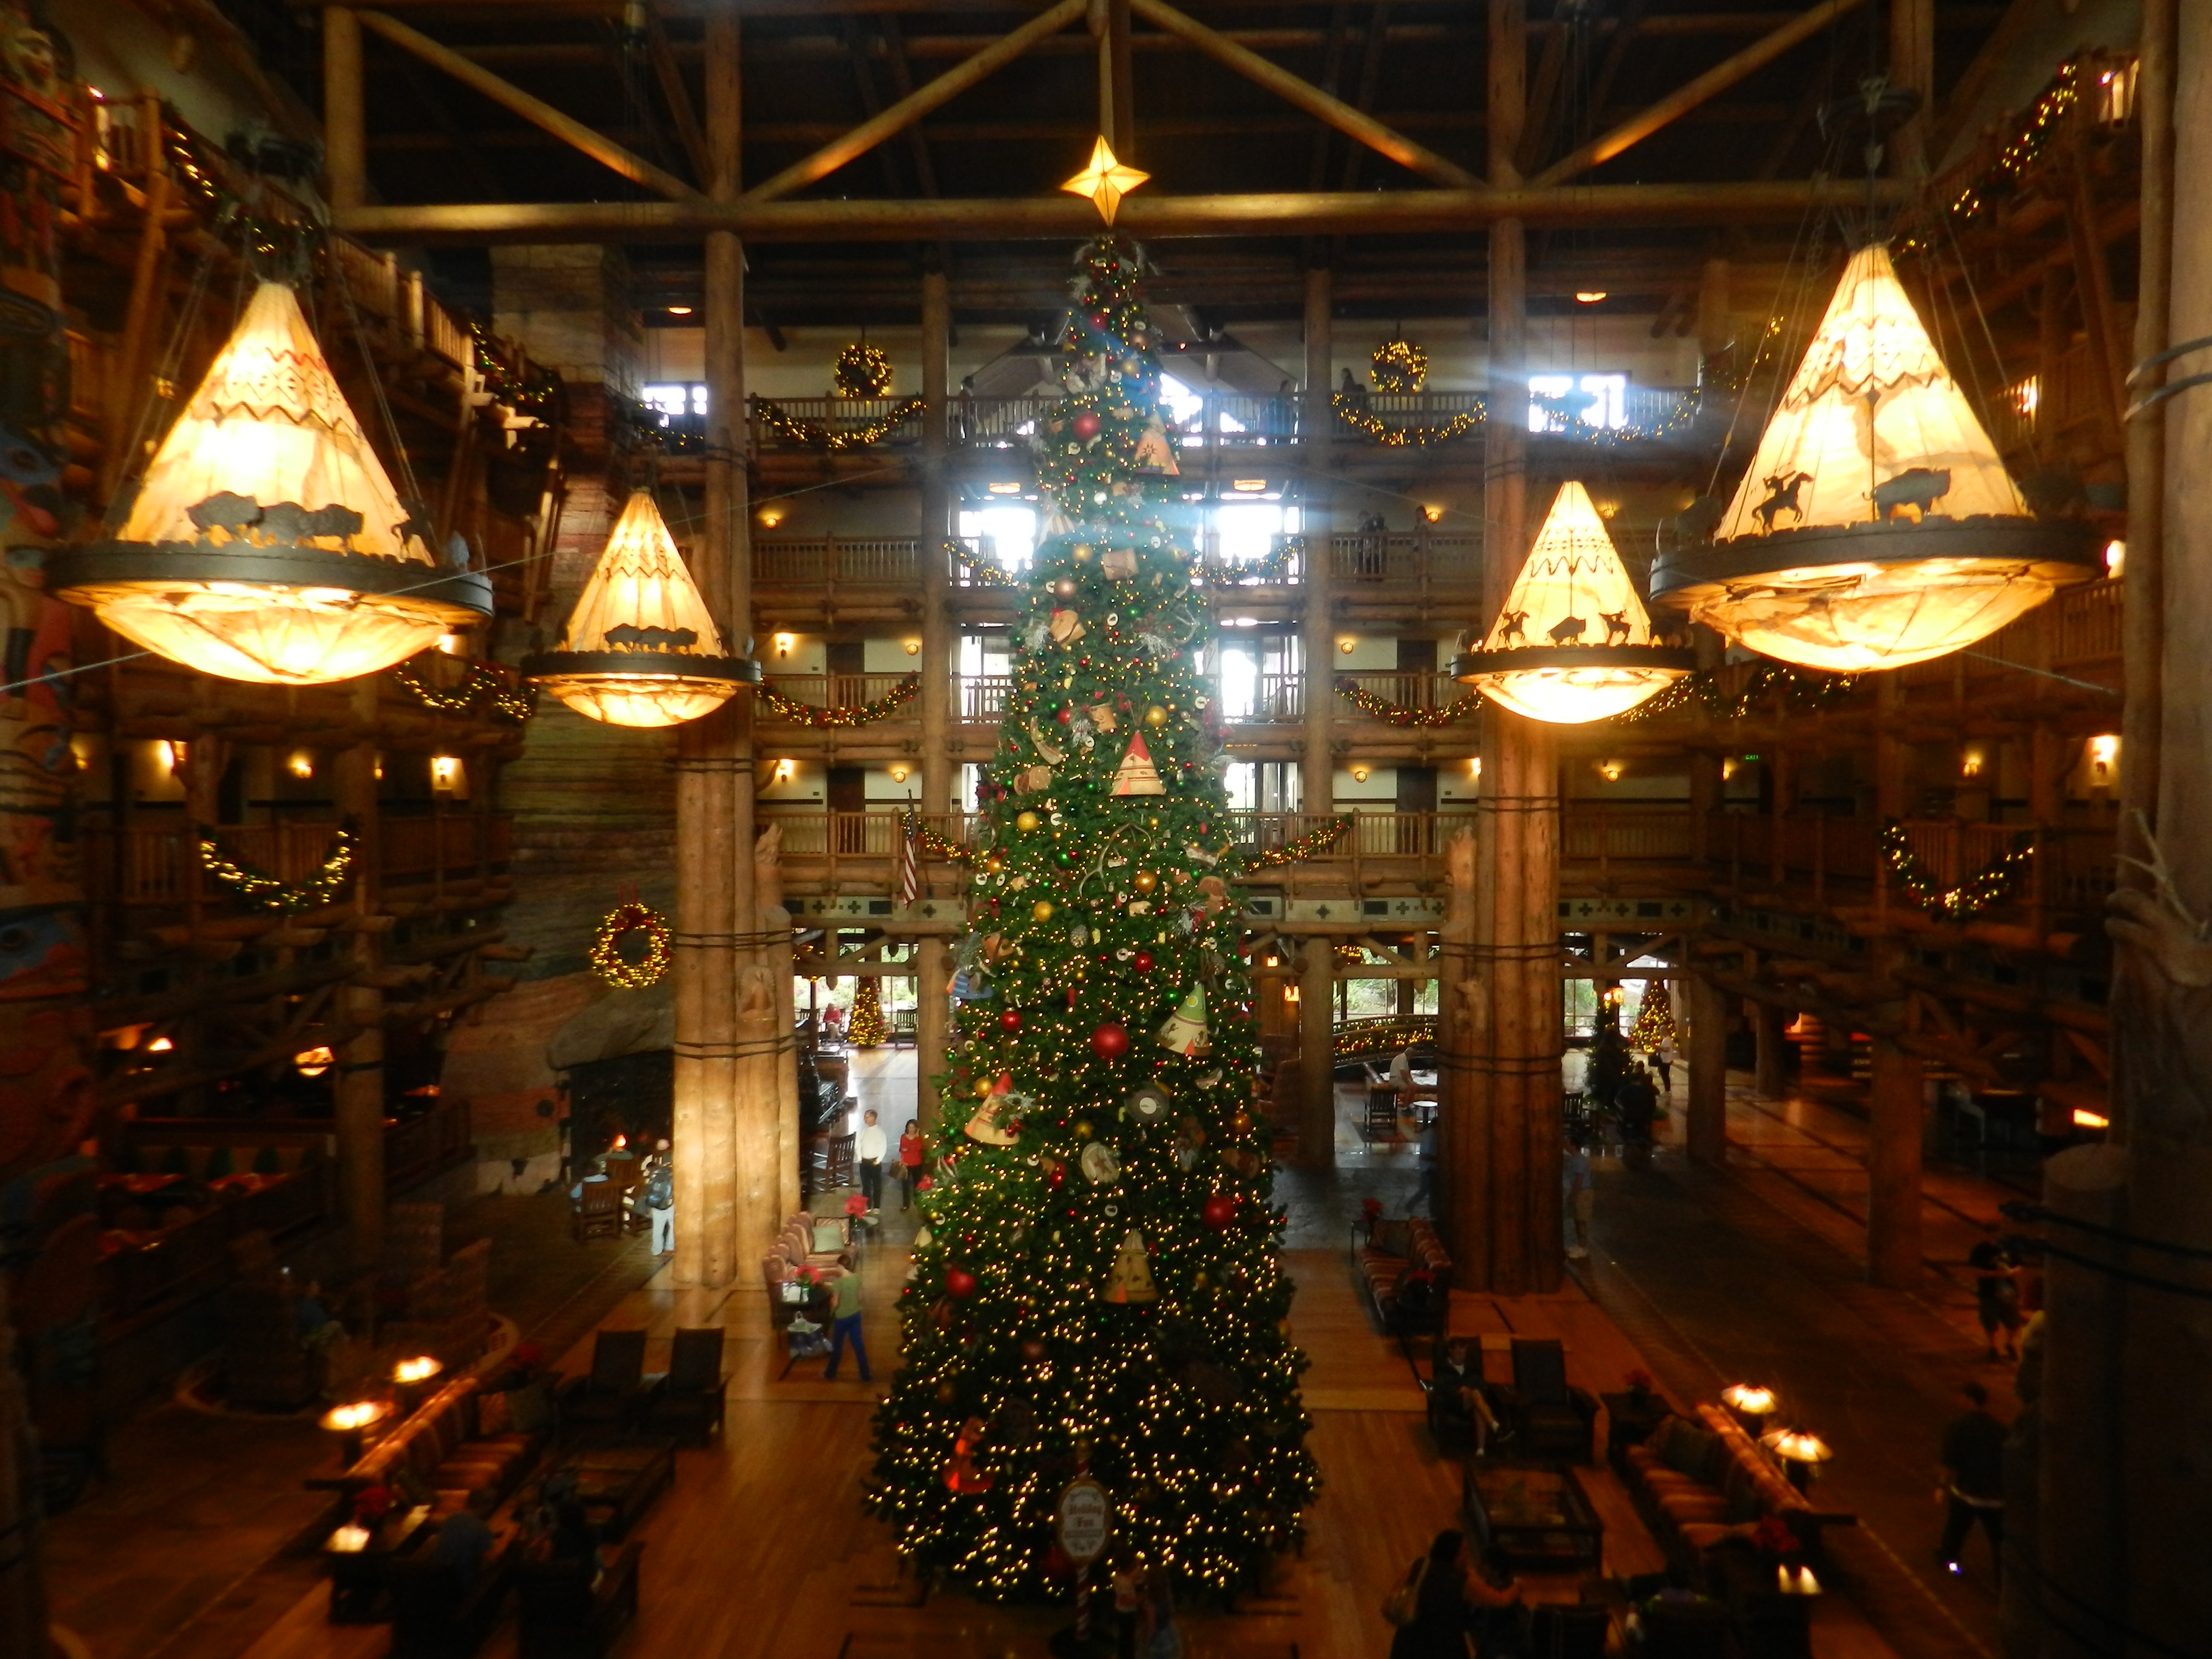 Christmas at Fort Wilderness Lodge Resort tall tree with logs cabin feel